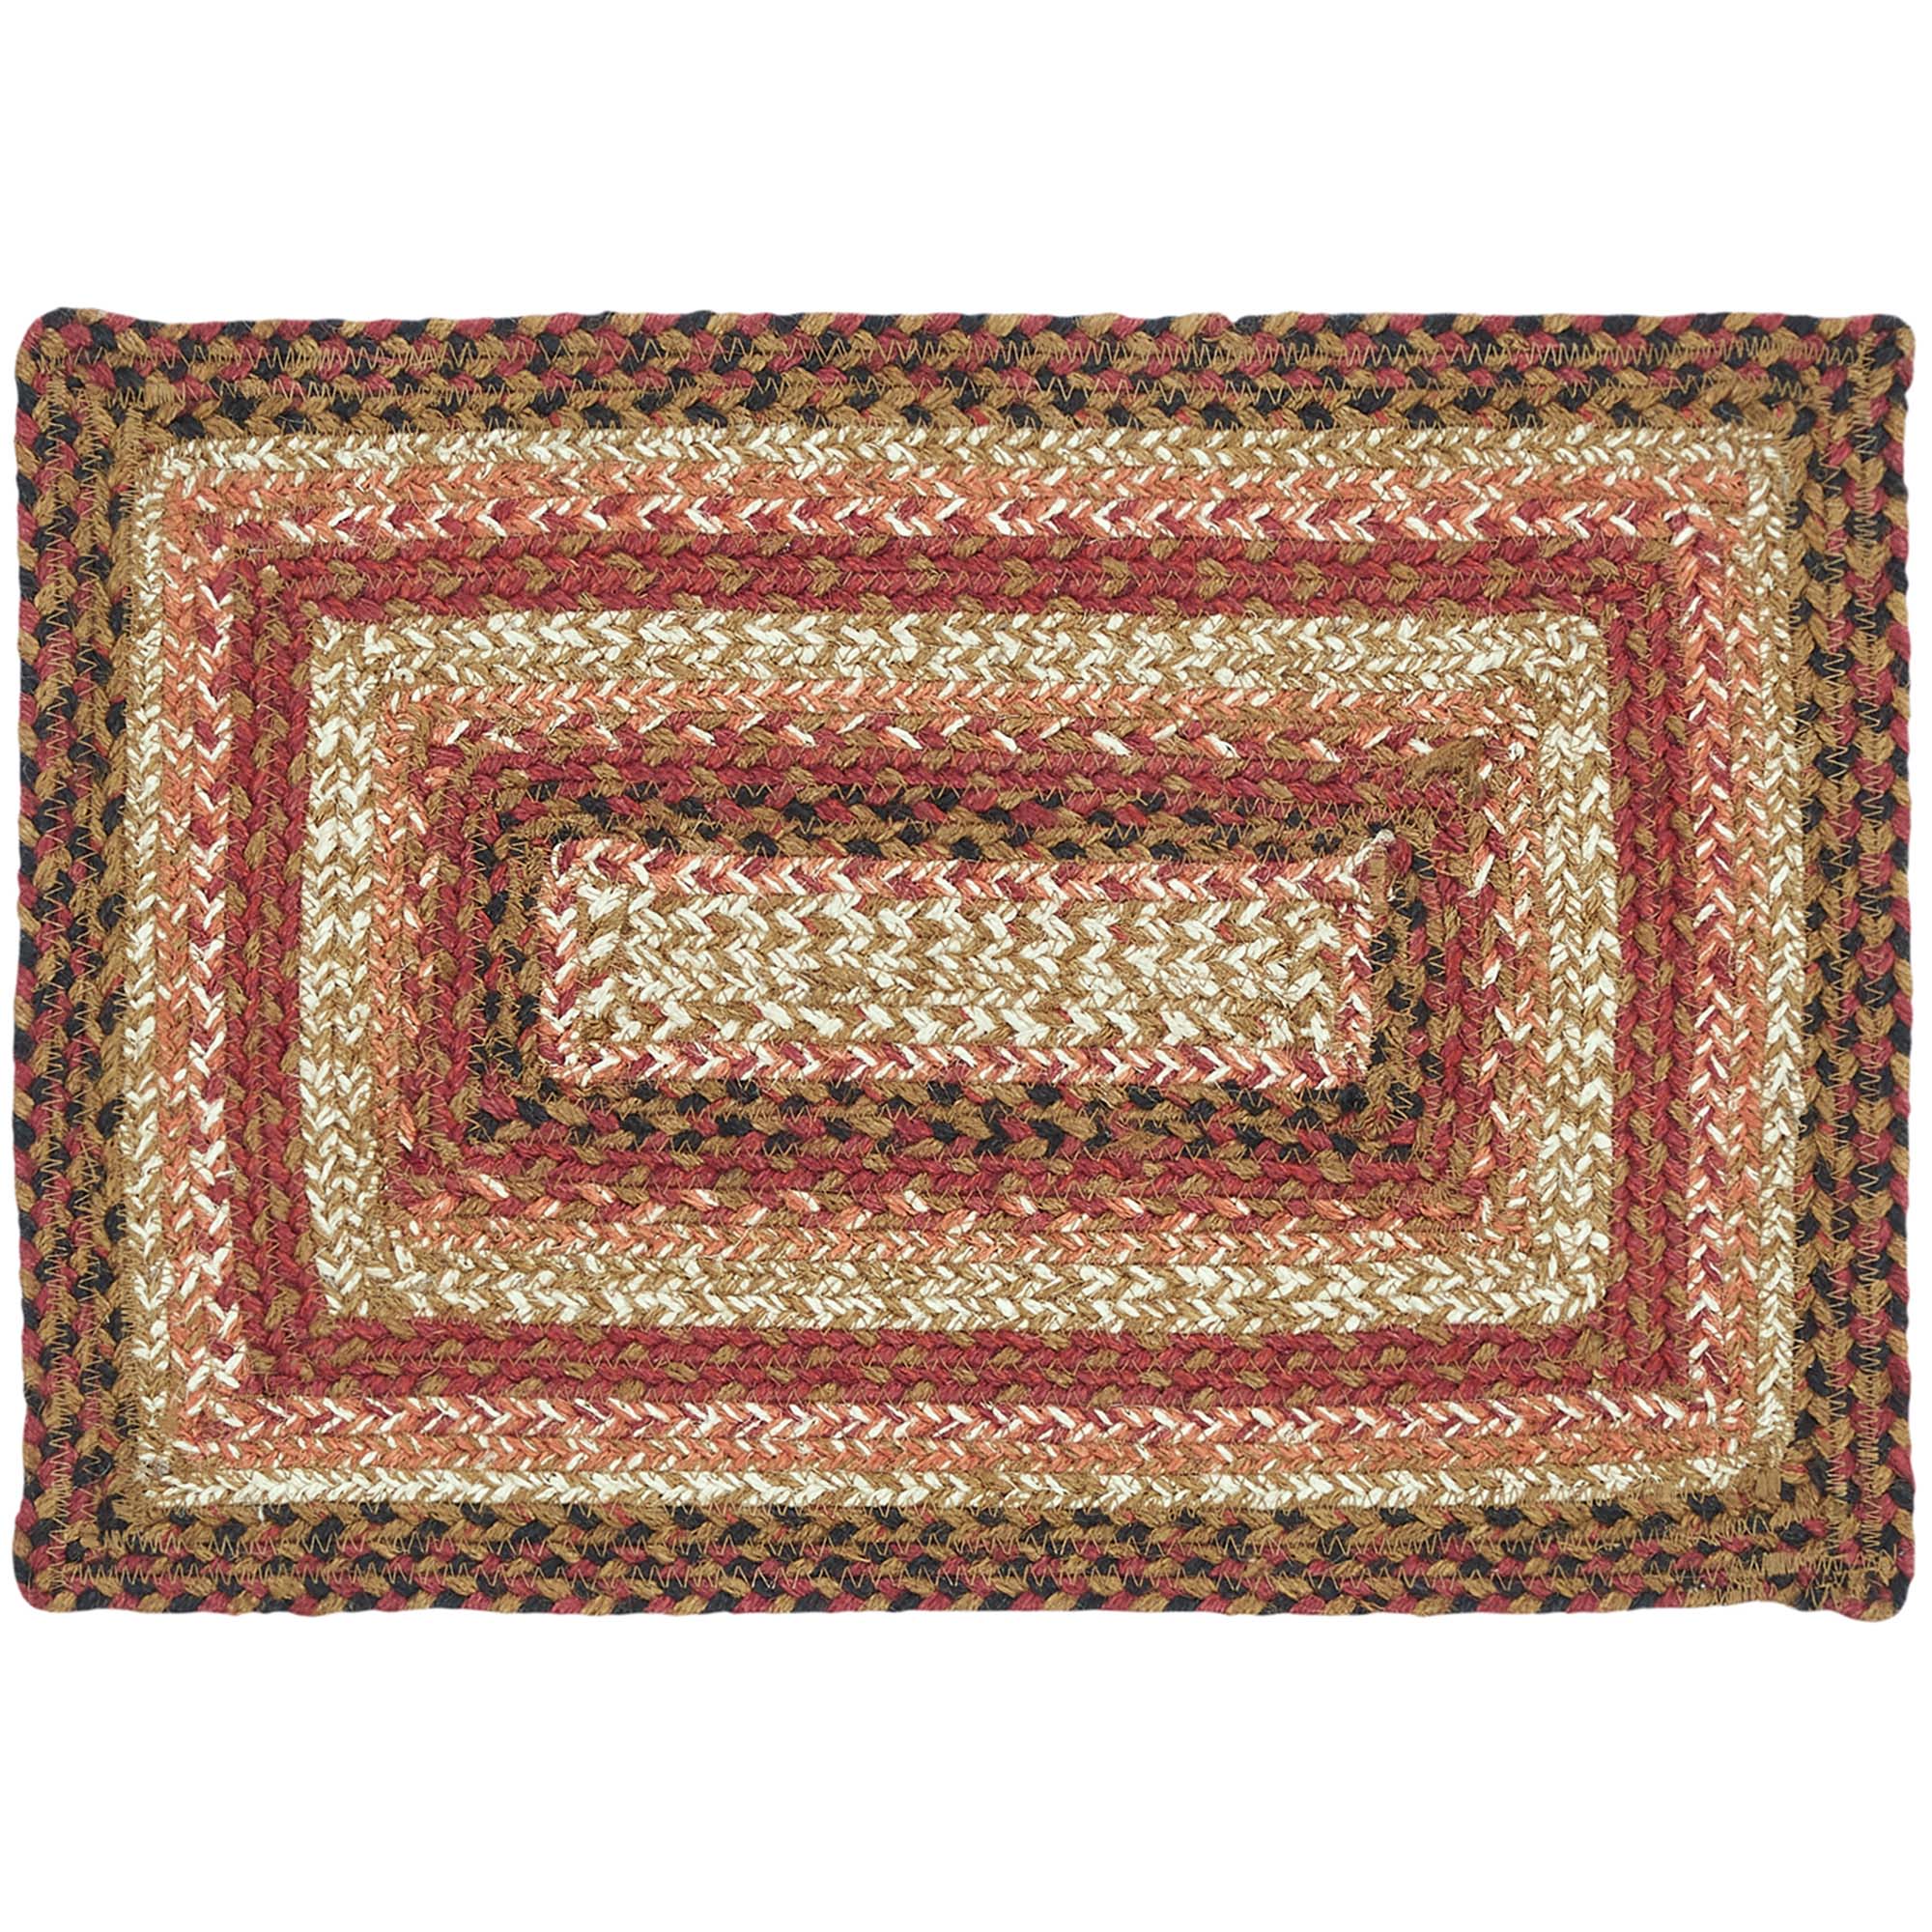 Ginger Spice Jute Braided Rect Placemat 12"x18" VHC Brands